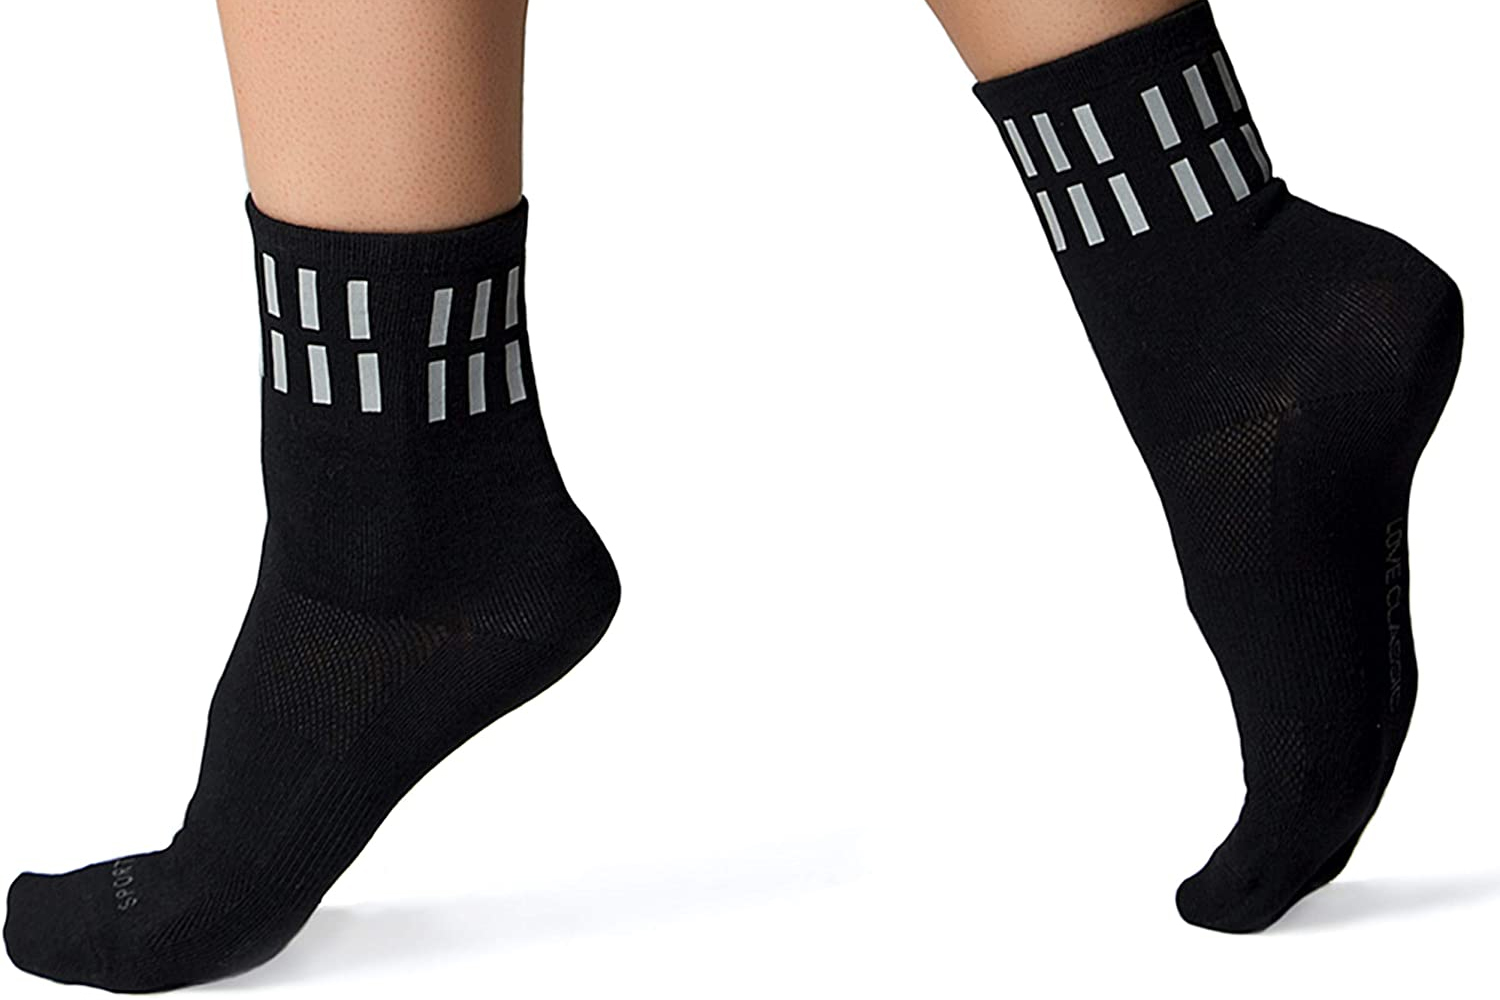 10 Best Athletic Socks To Keep Feet Comfy and Cool